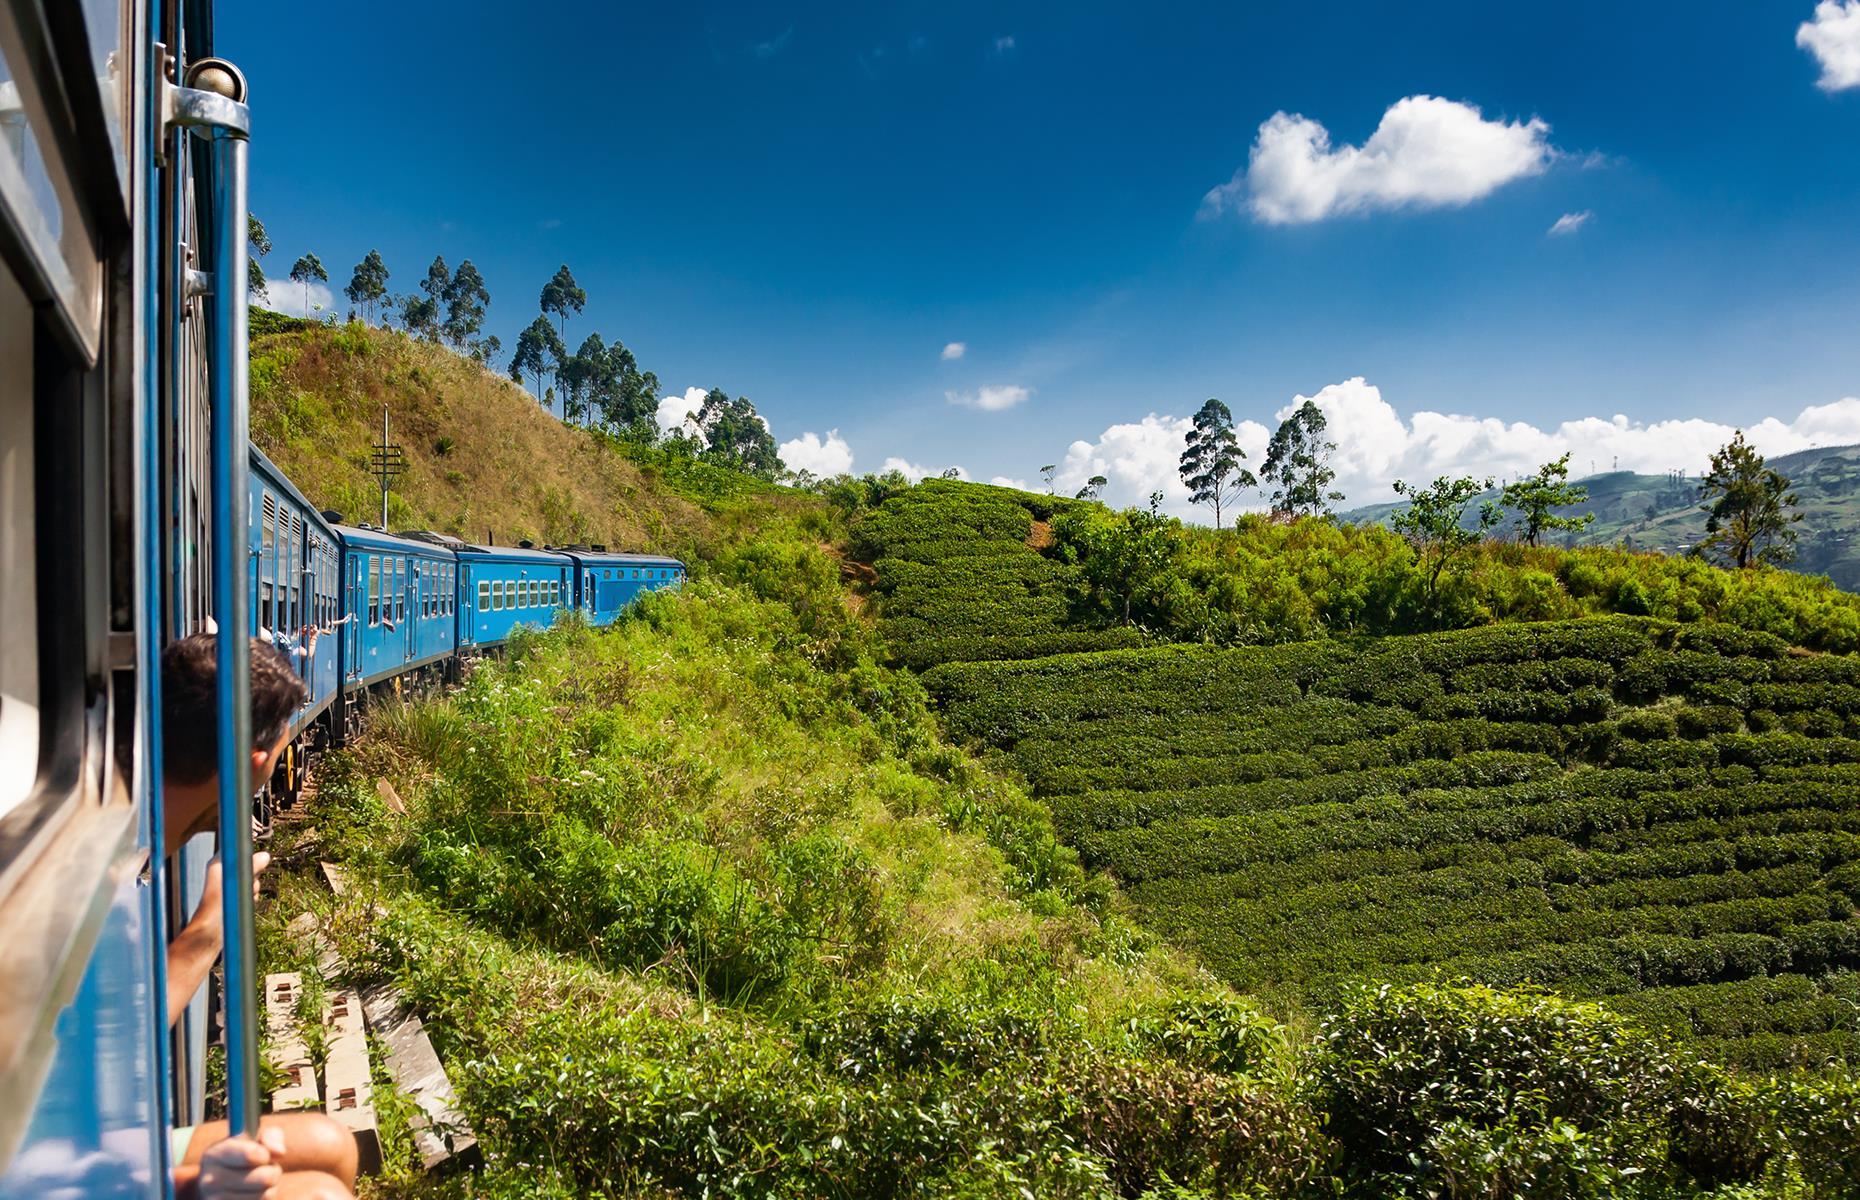 Built by the British in the late 1800s, Sri Lanka's rail system was originally used to transport tea and coffee for export so it's no surprise that this seven-hour trip takes passengers through stunning tea plantations, remote villages, lush green hills and tumbling waterfalls. If travelling from Kandy, know that the better views are from the seats on the right.